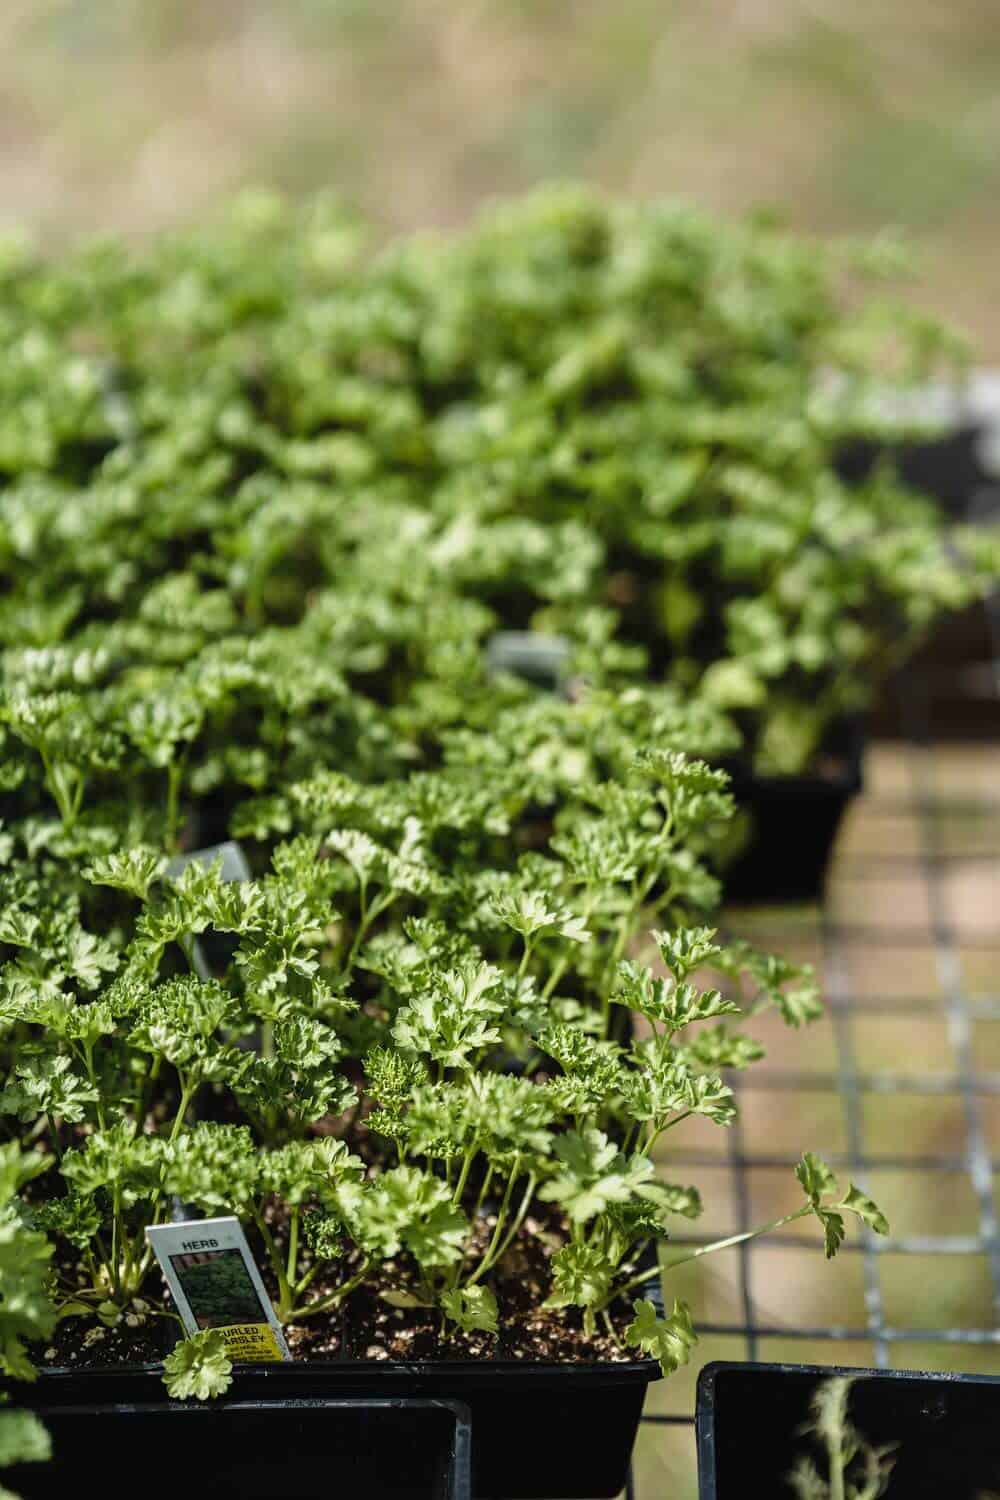 Growing parsley in containers